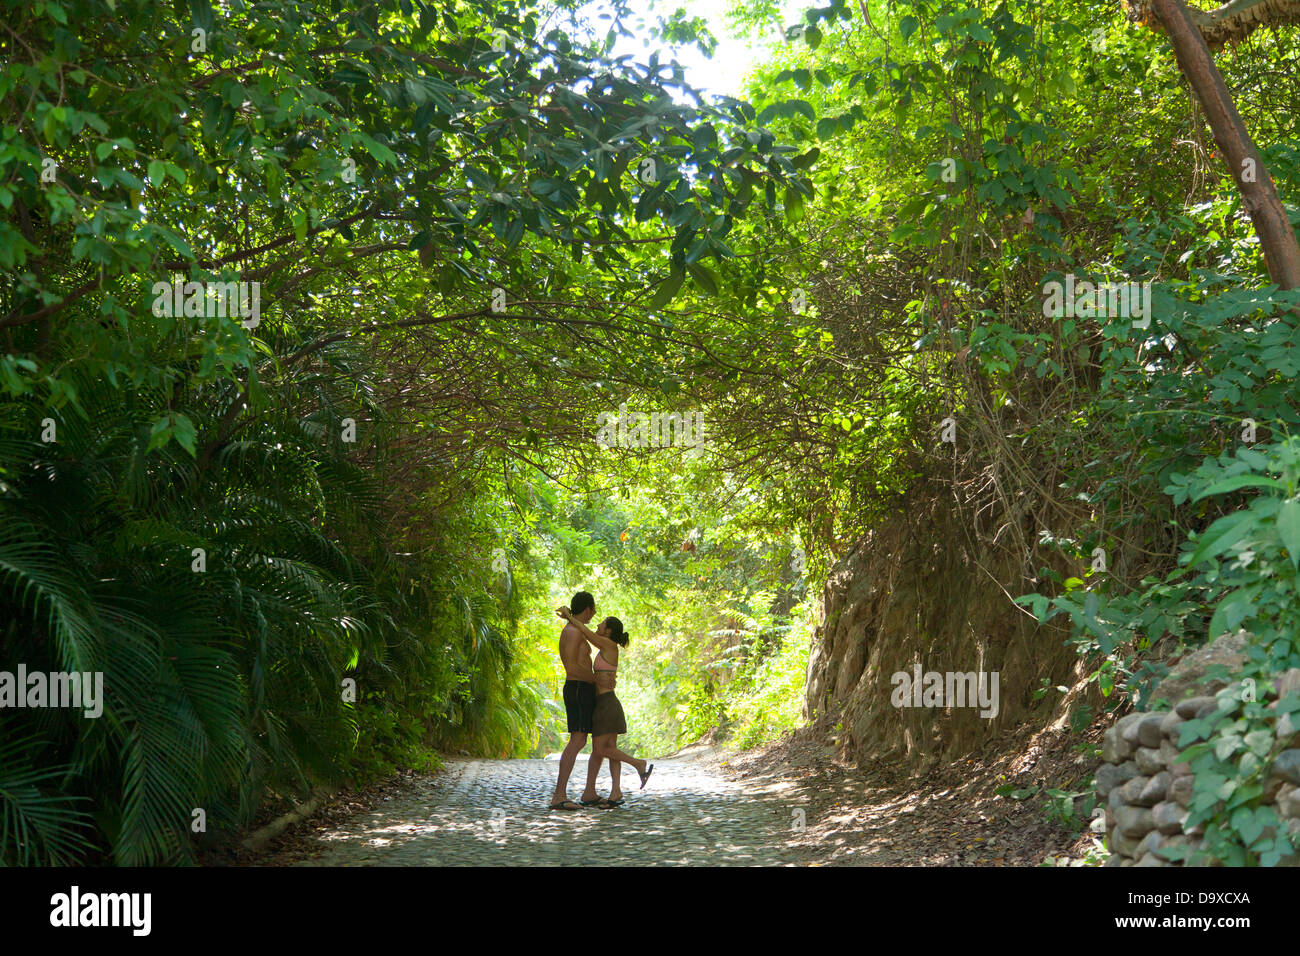 Couple walking down tree arched path Stock Photo